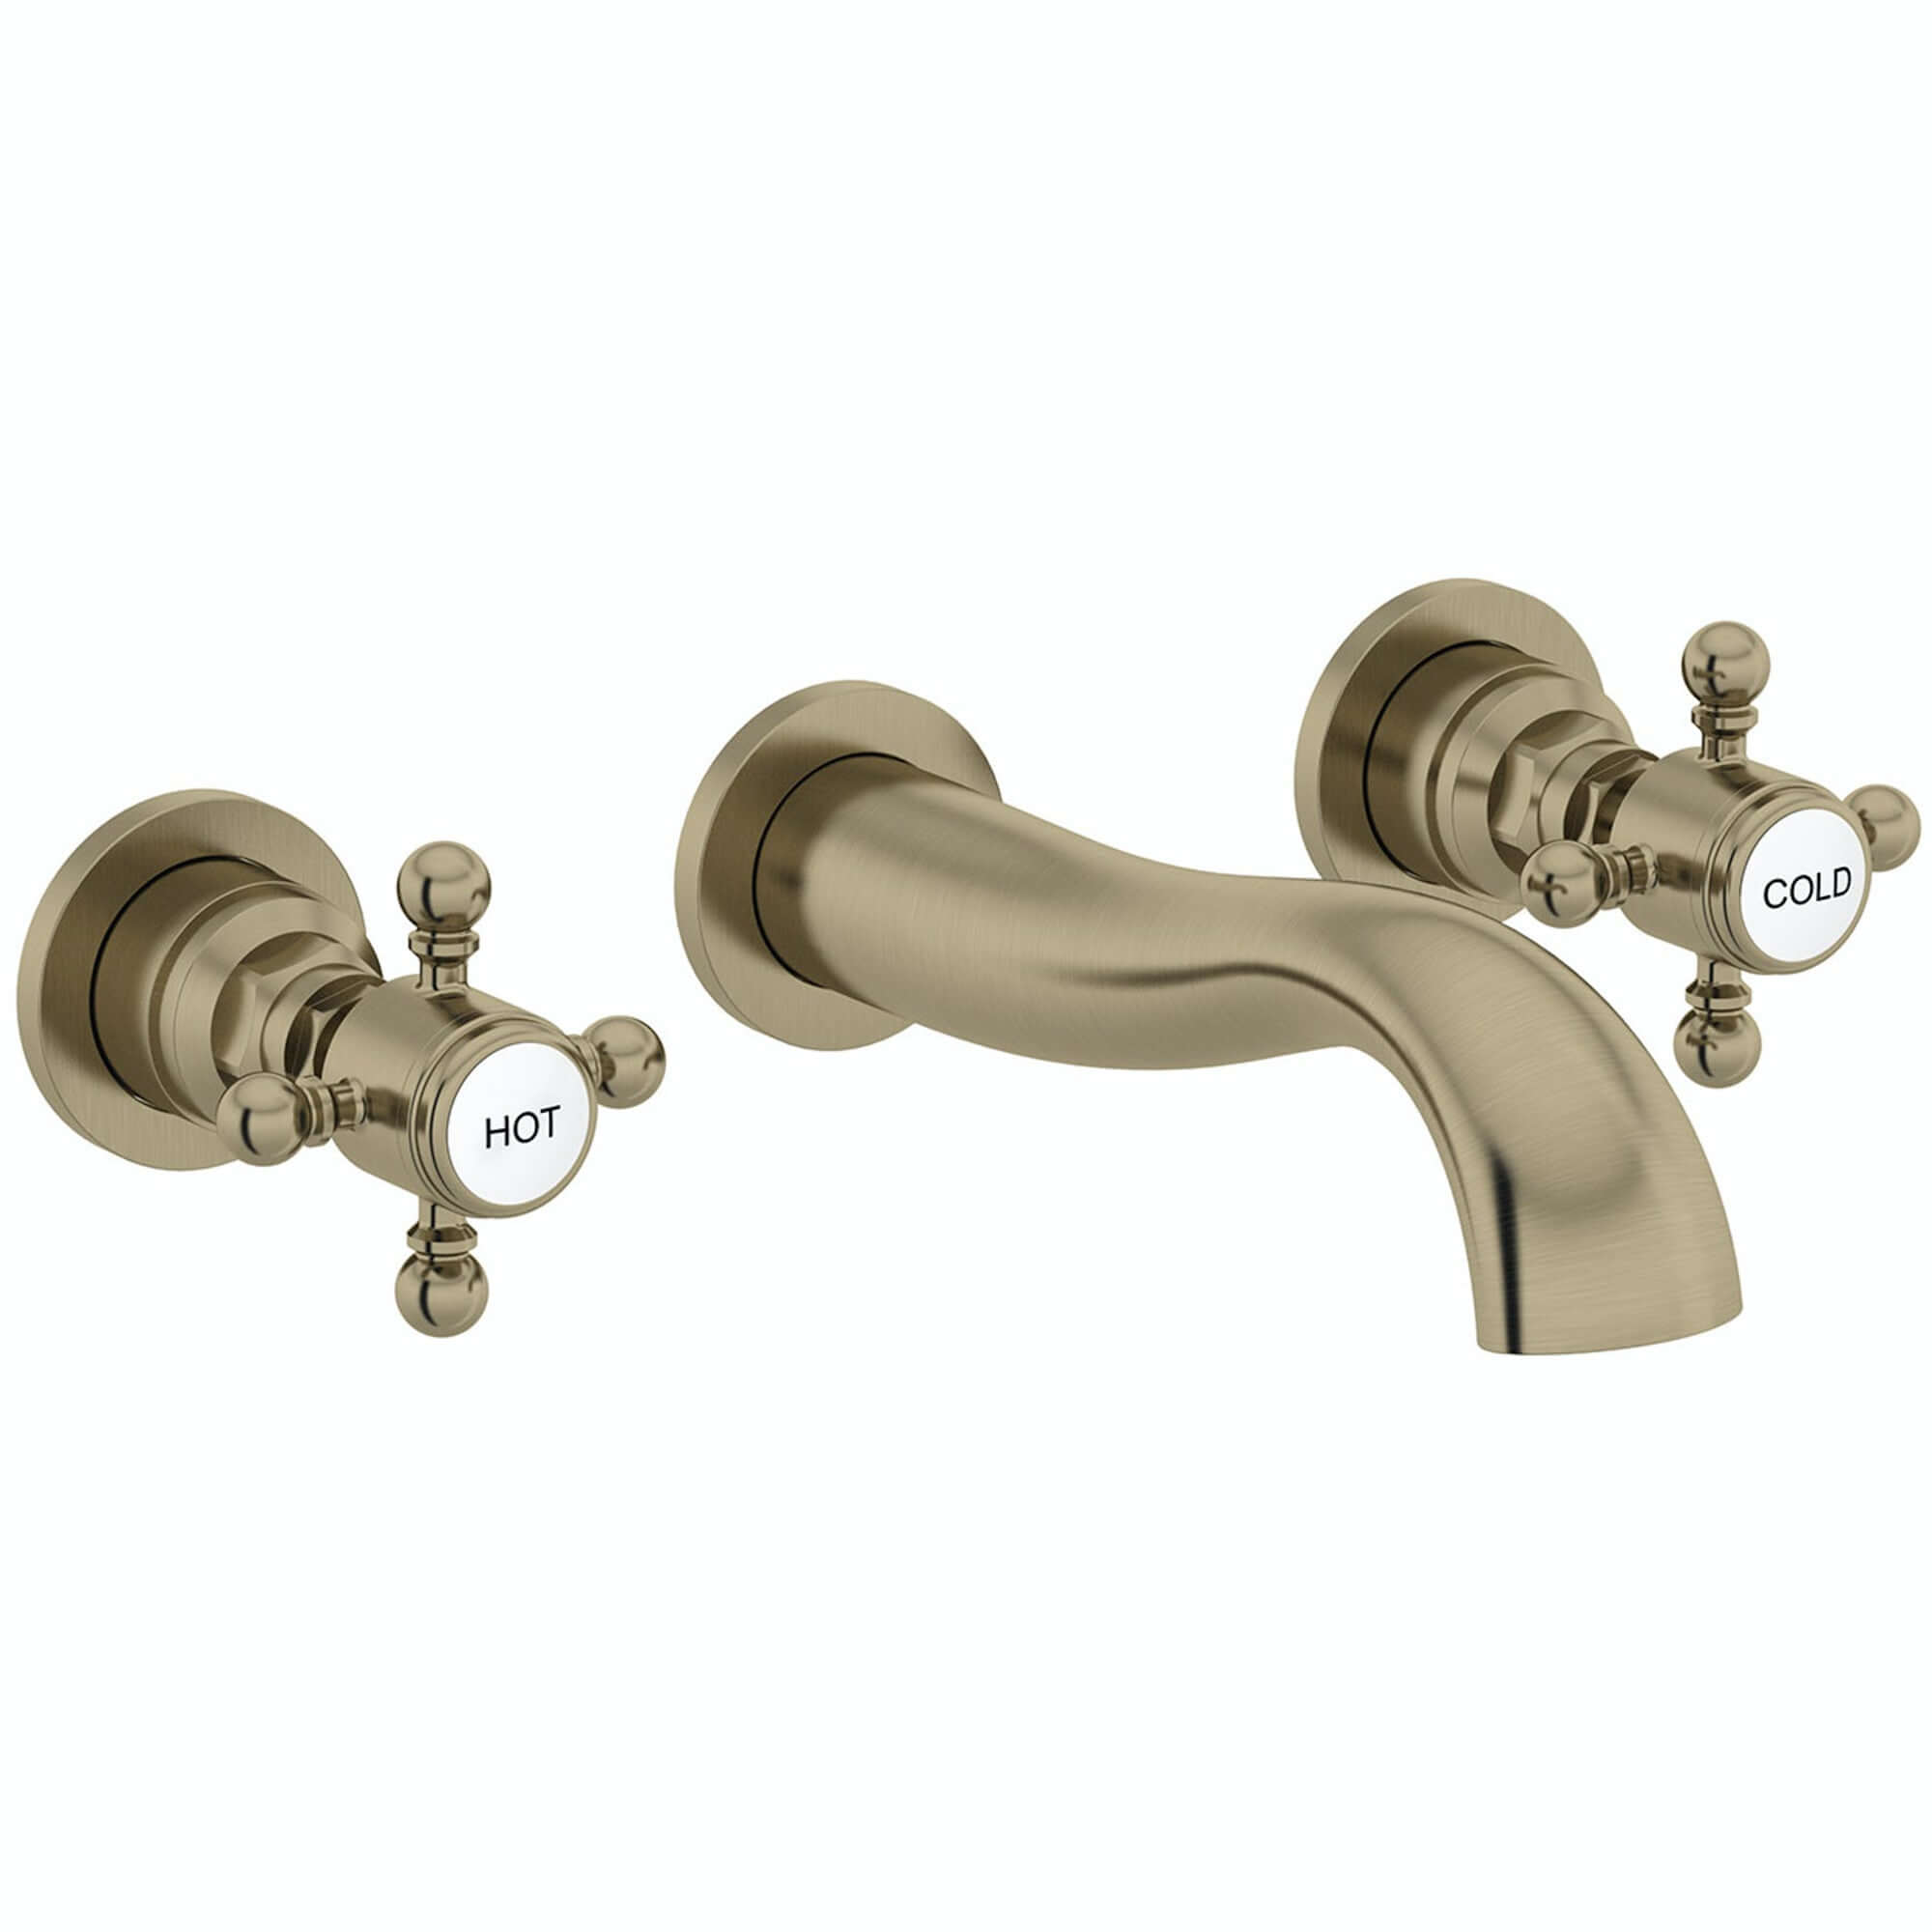 Camberley traditional wall mount basin mixer tap crosshead 3 hole - antique bronze